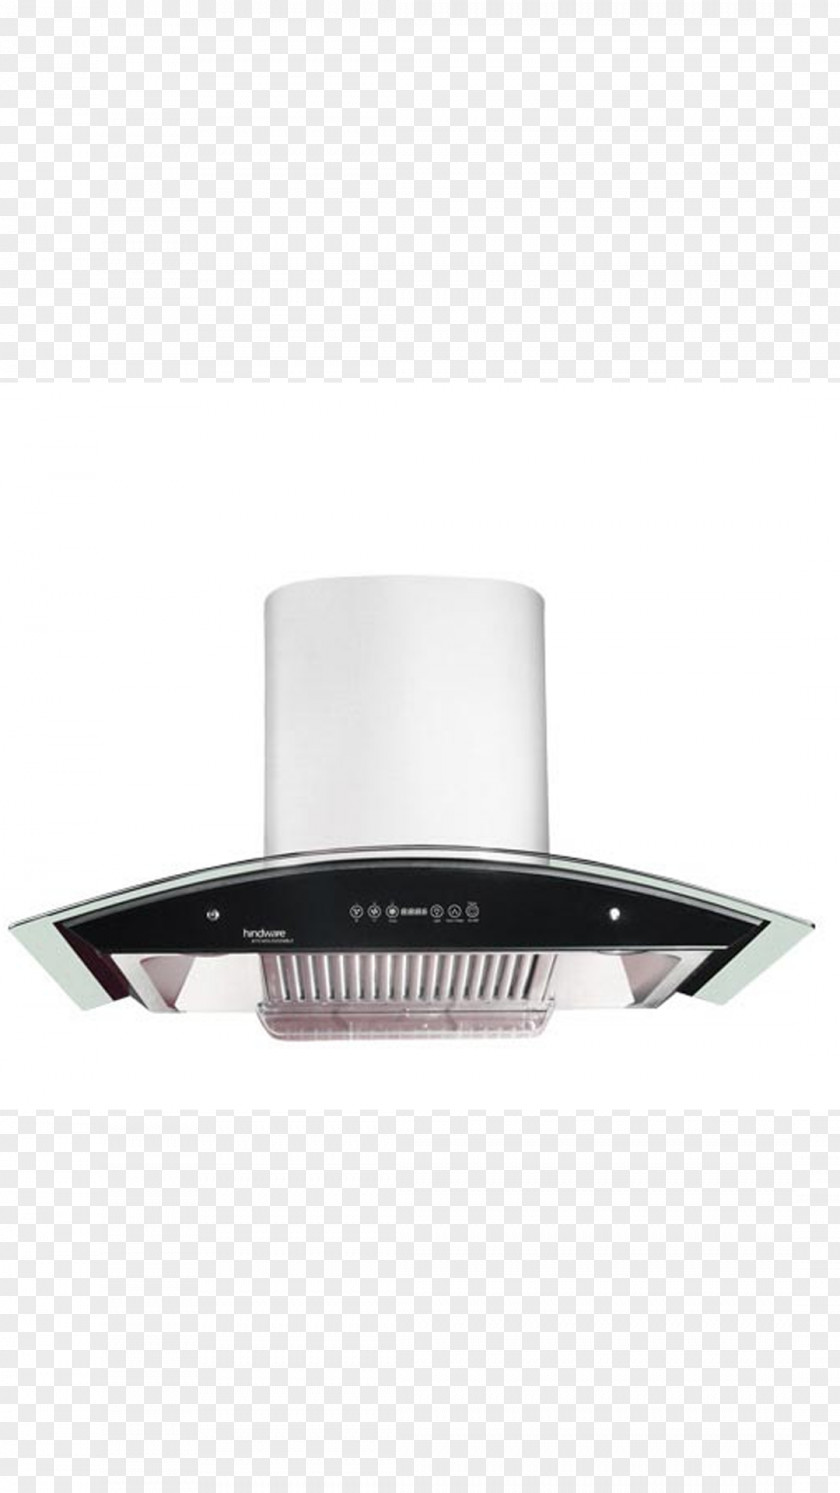 Chimney Sweep IFB Home Appliances Kitchen Oven PNG